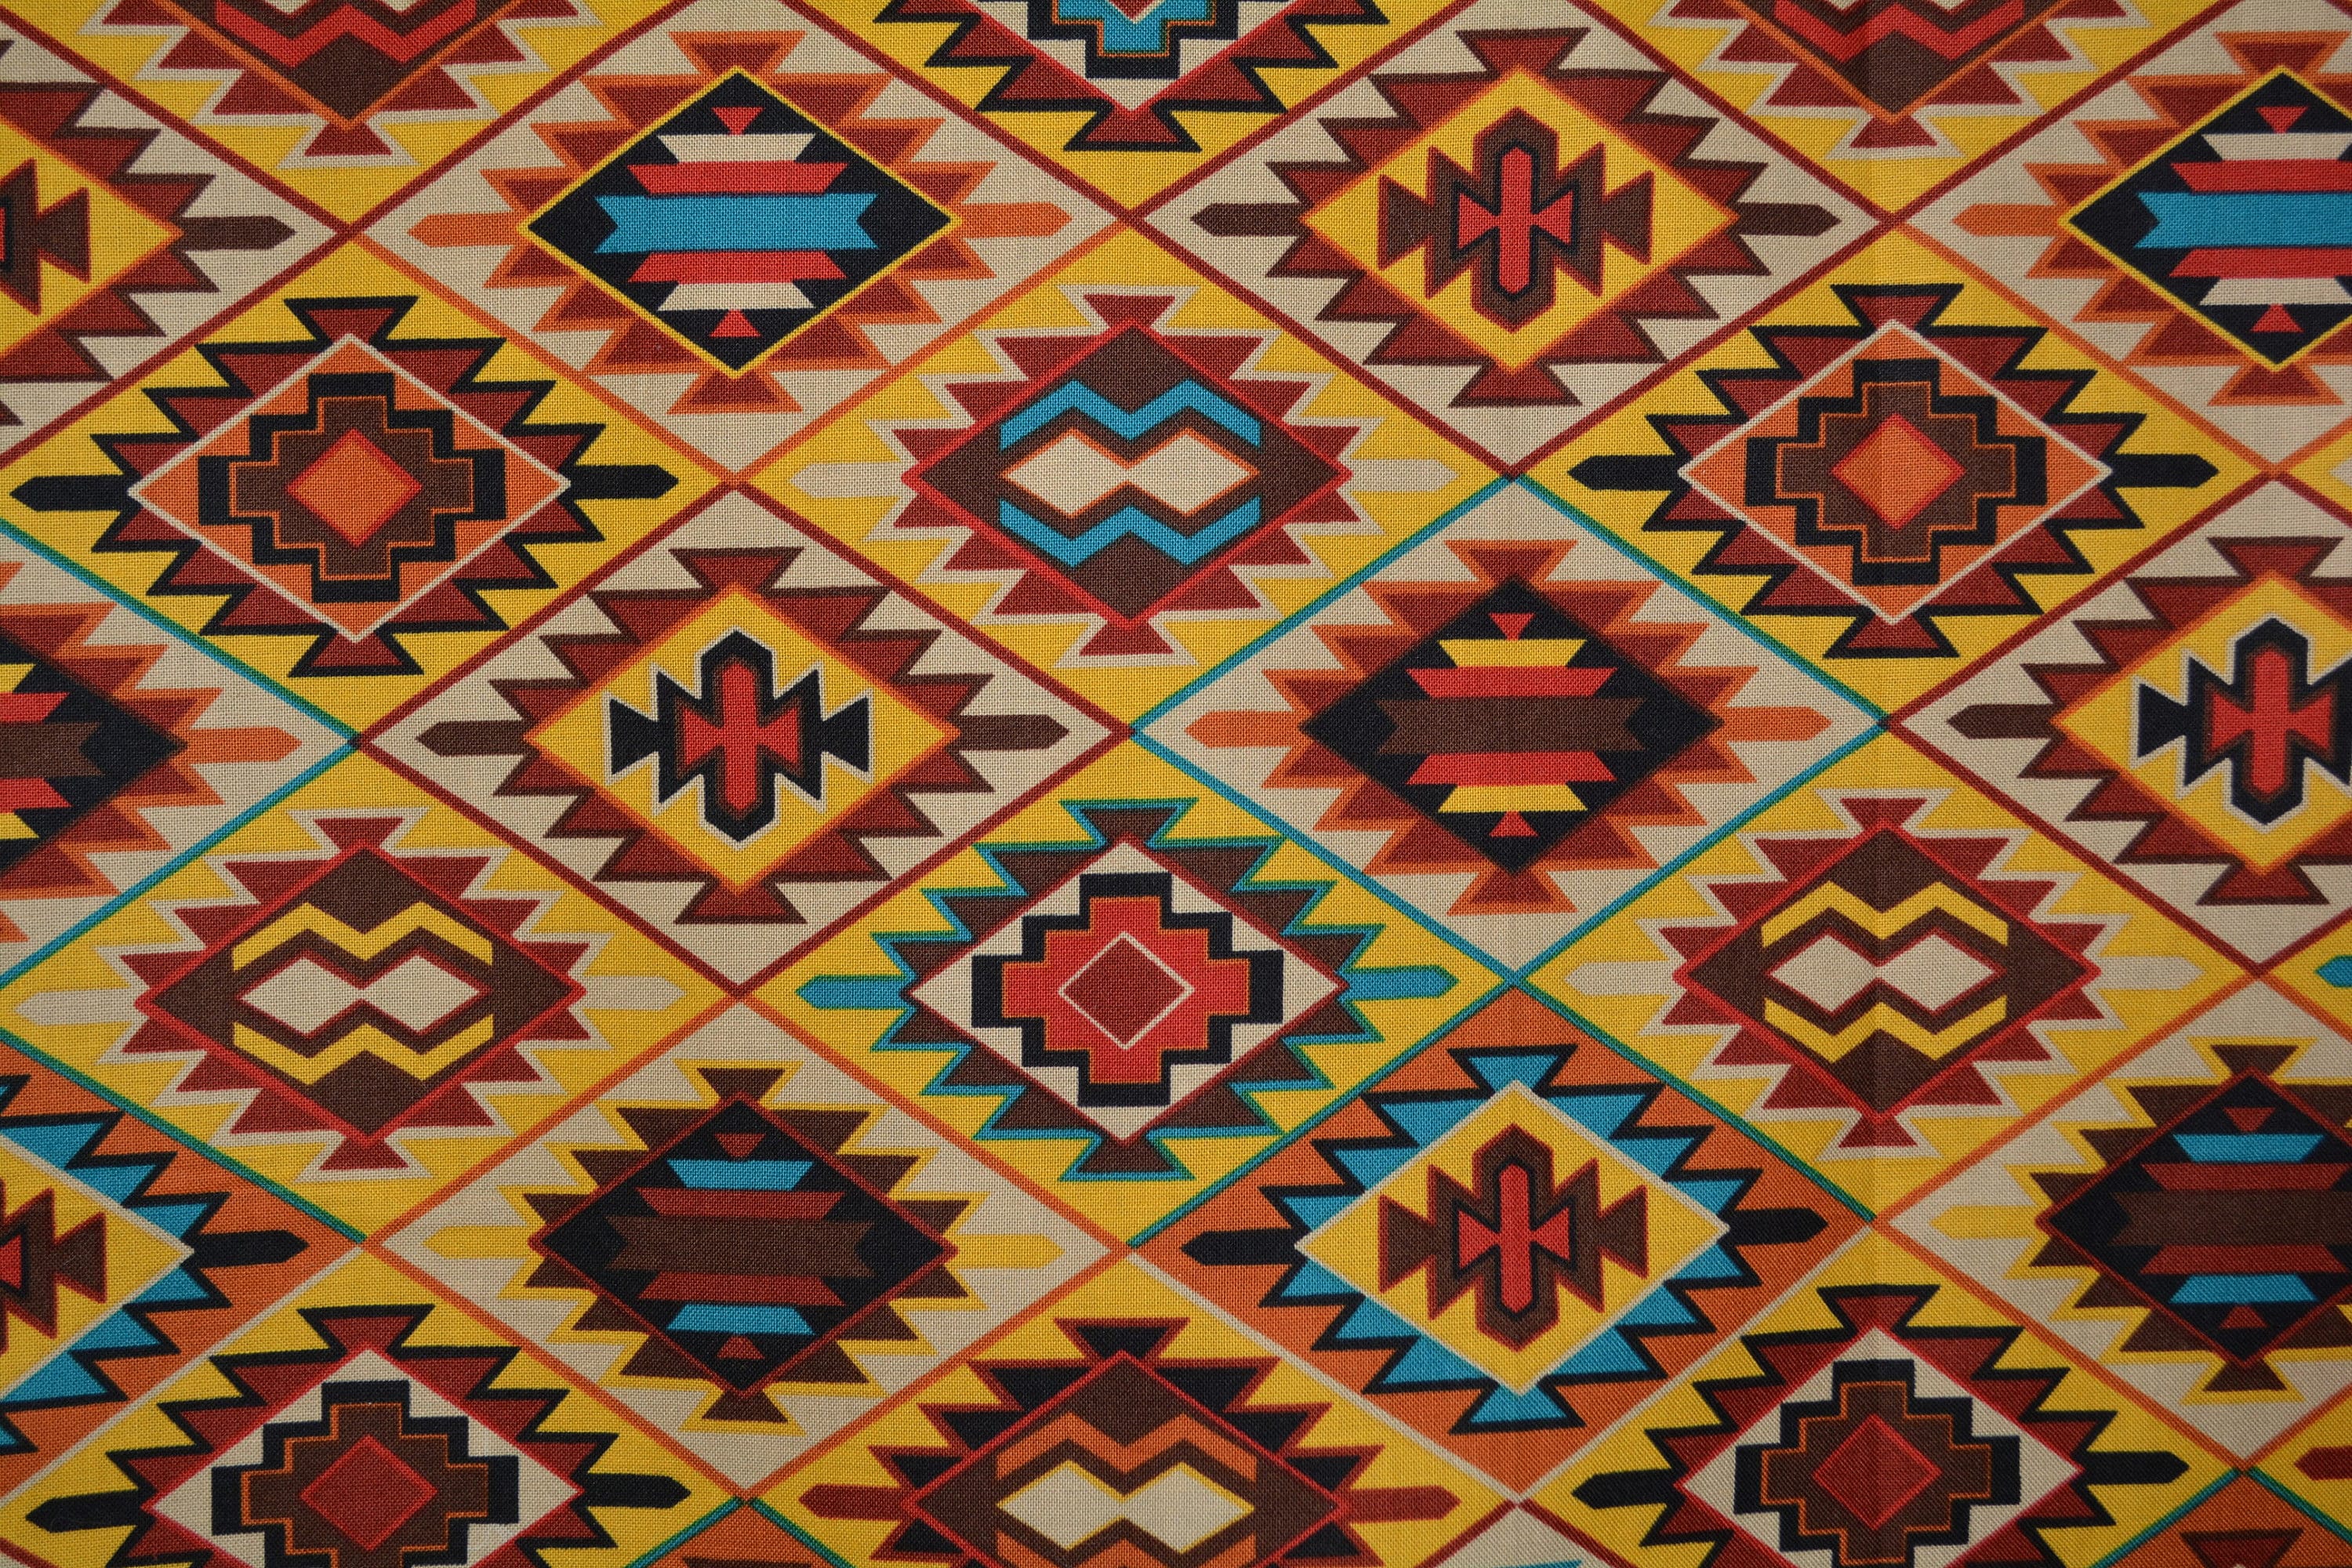 Kyst Credential Fugtighed Southwest fabric Navajo blanket pattern fabric quilting cotton